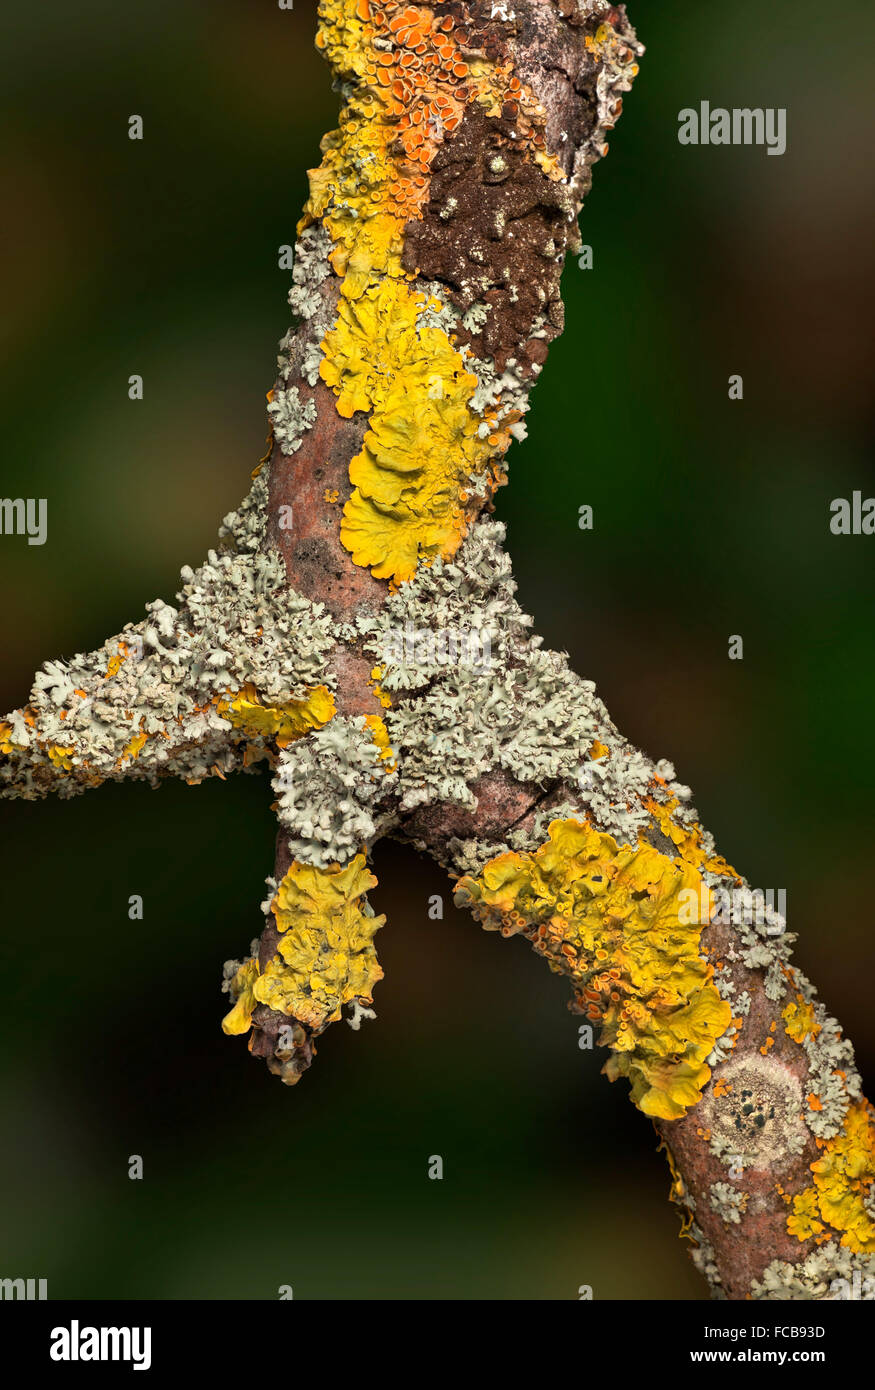 Lichen diversity, healthy mix of species growing on a tree branch Stock Photo